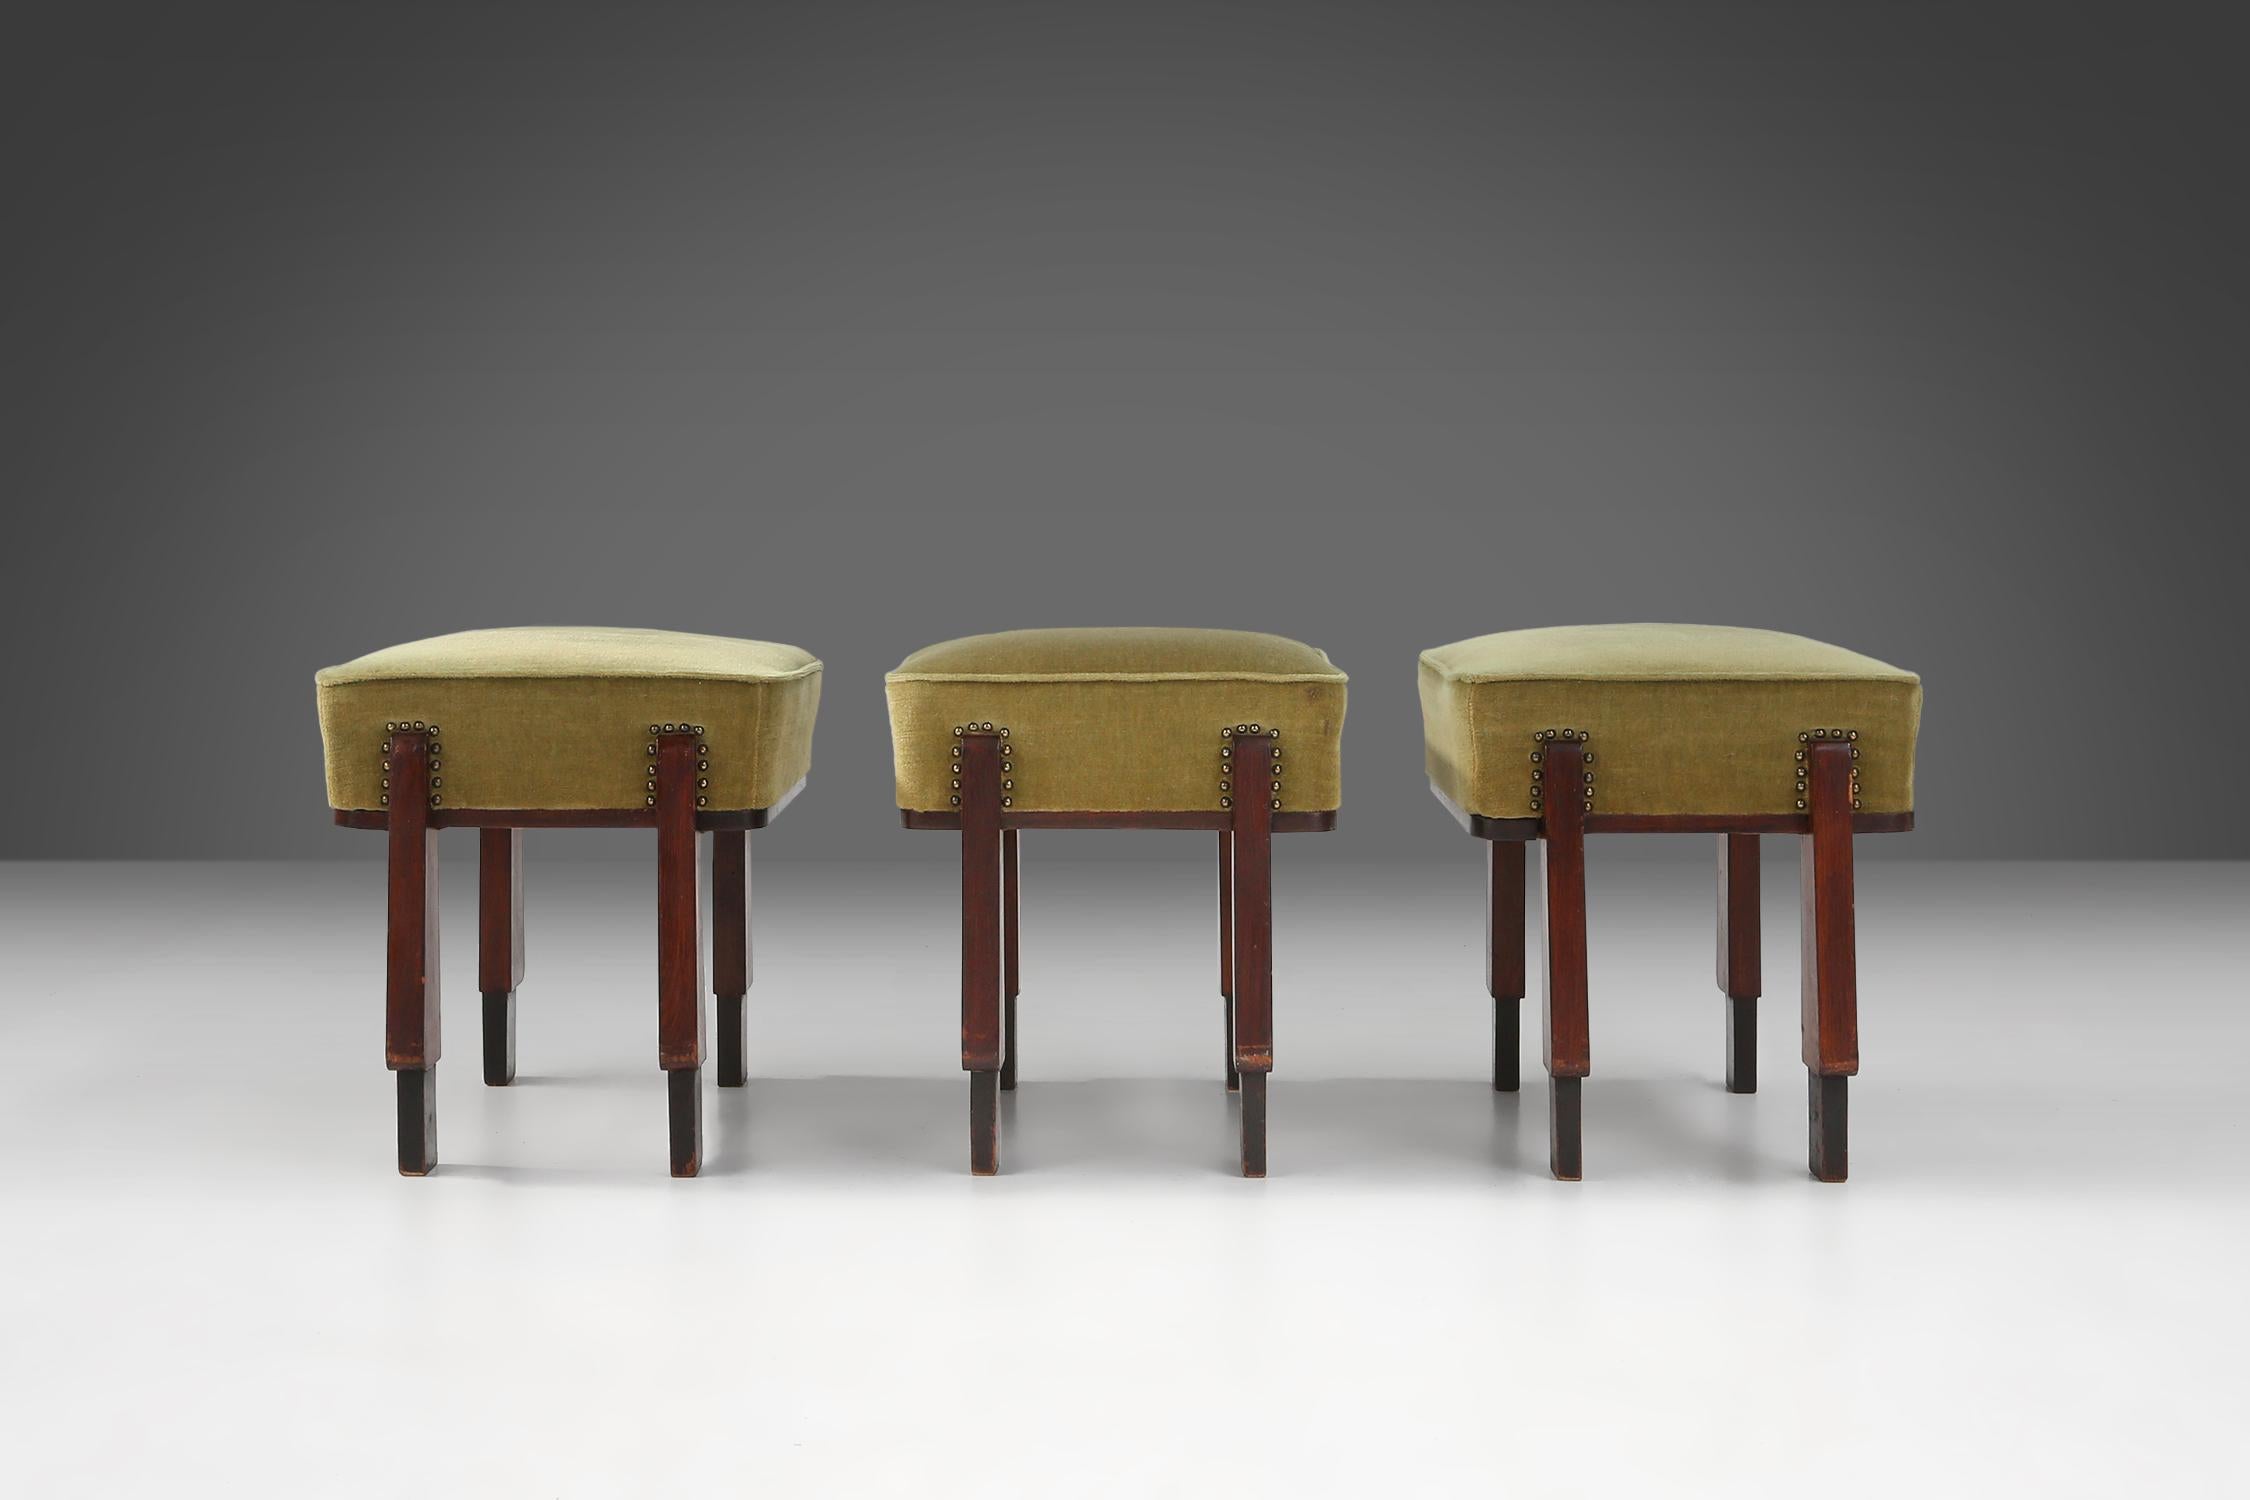 Elegant art deco stool /pouf with green upholstery (3 pieces), France 1930s For Sale 5